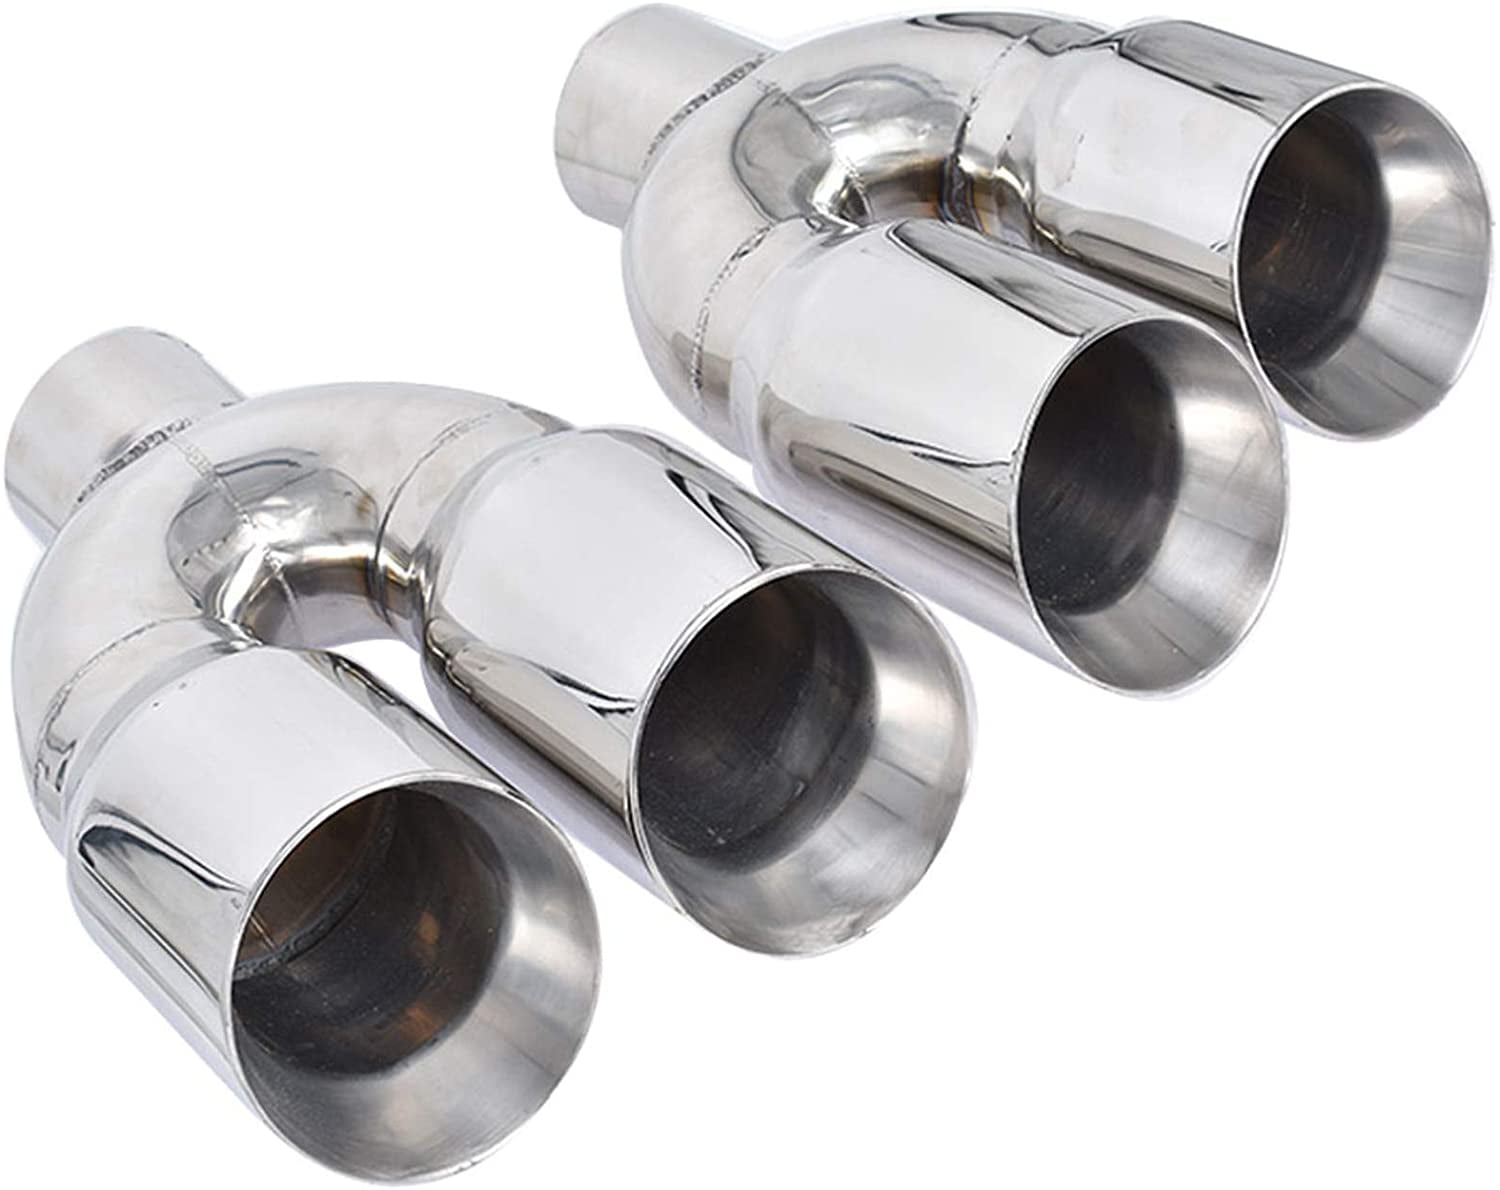 3 Inlet NETAMI Double Wall Stainless Steel exhaust Tip 3 Inlet /2 pack, Black 